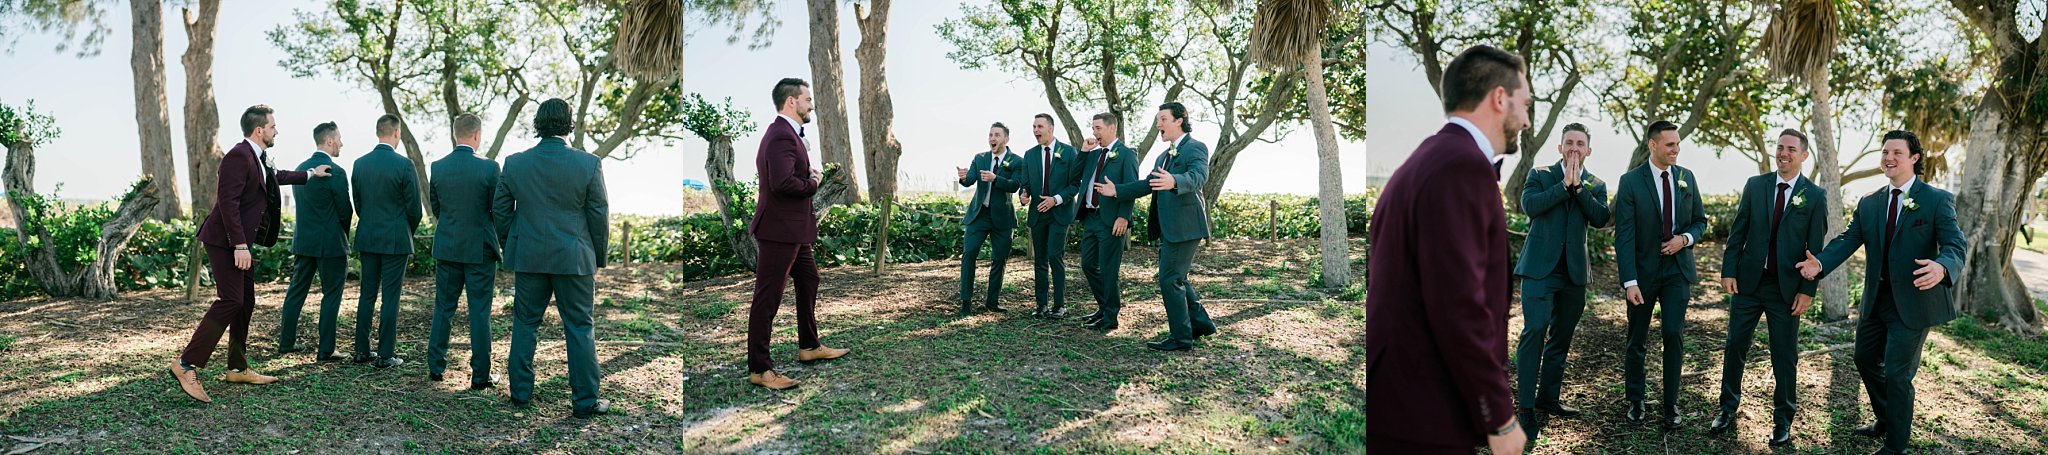 groom shares first look with his groomsmen on Florida wedding day